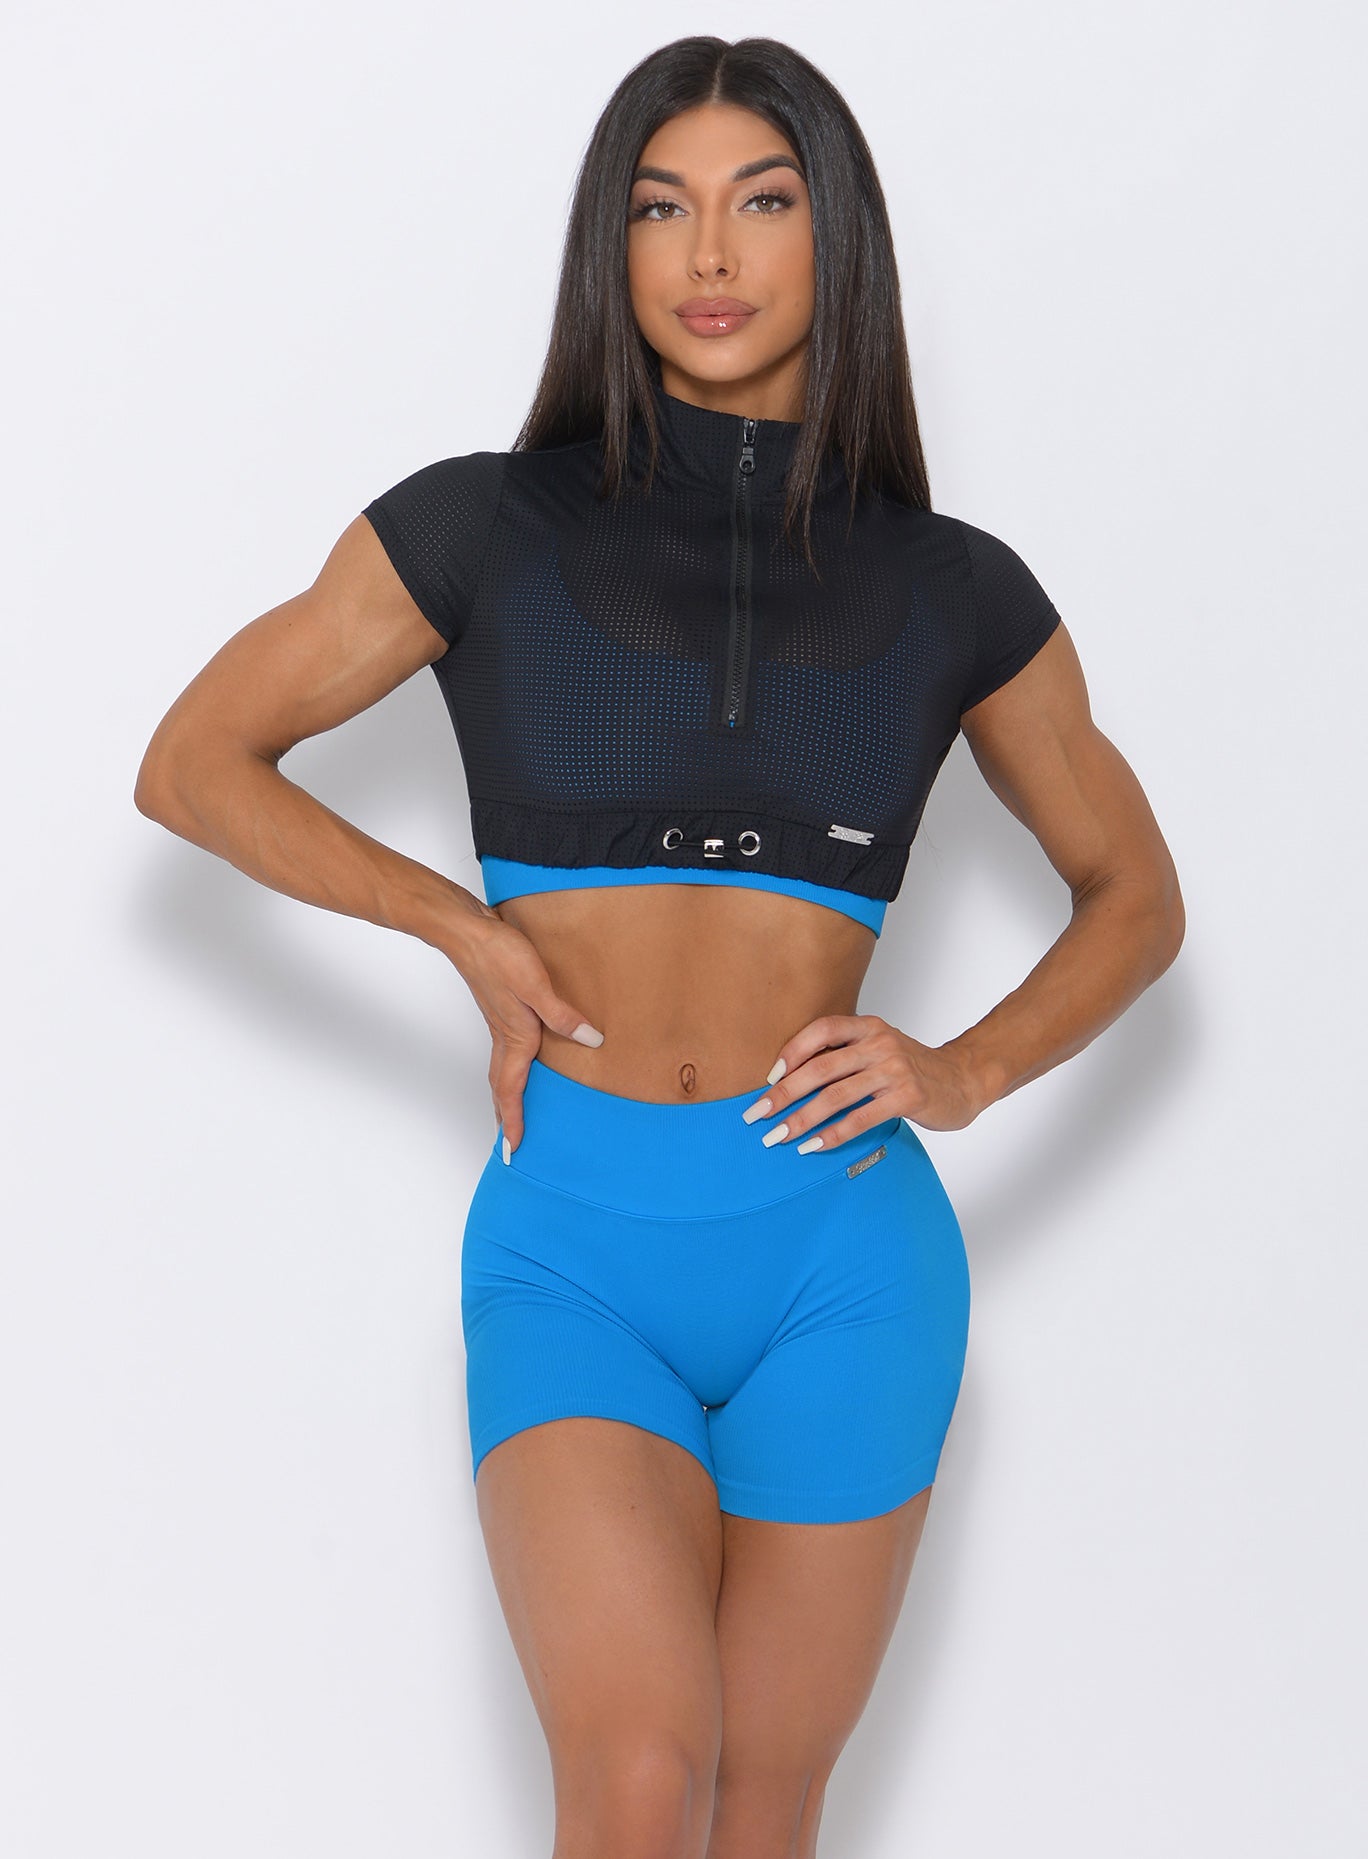 Front view of the model with her hands on wait wearing our black glow up top and a blue shorts 